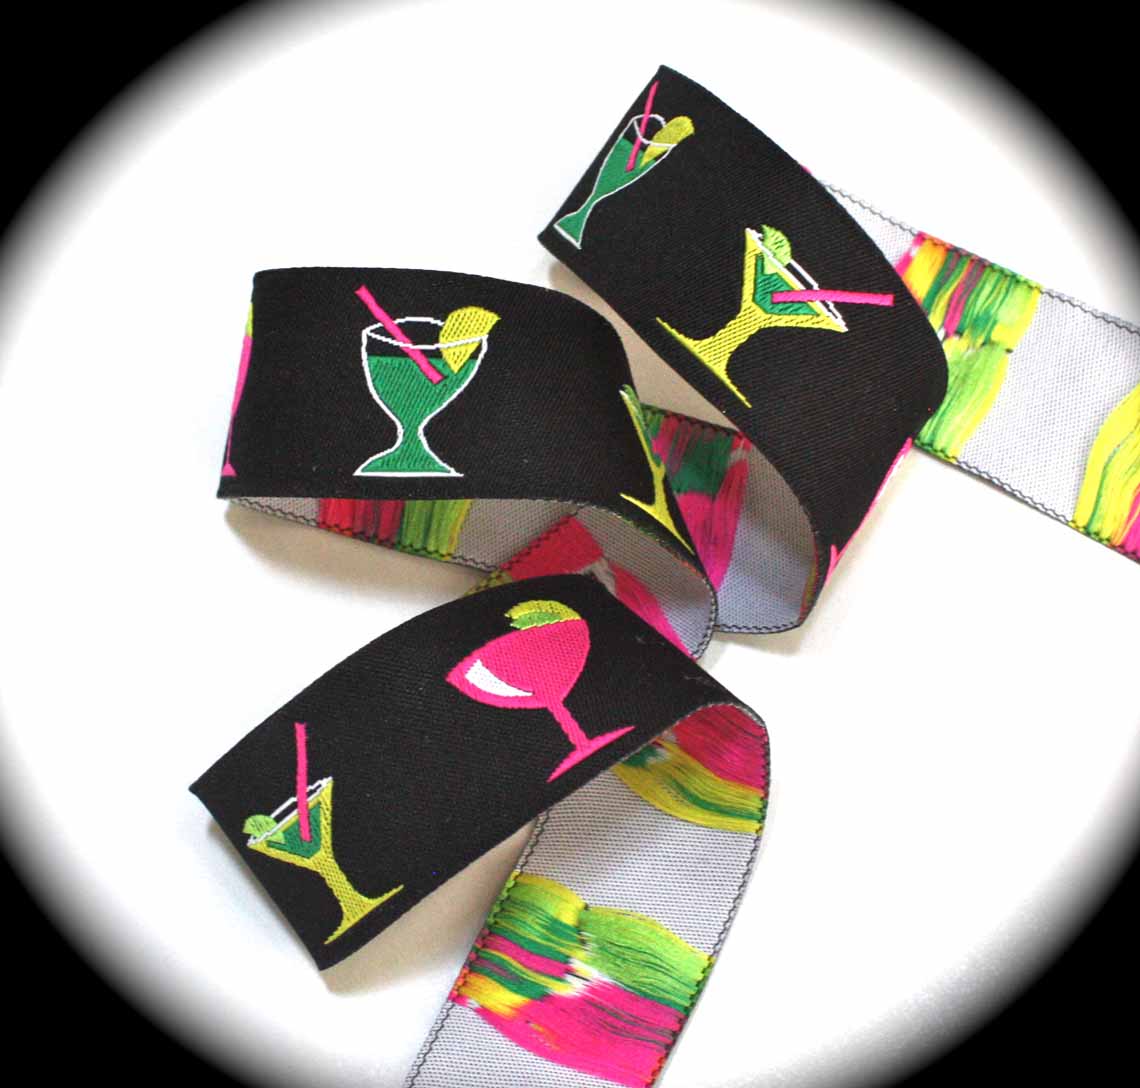 Cocktail2015 1" x 3 yds Black, Pink, Yellow and Green NEW